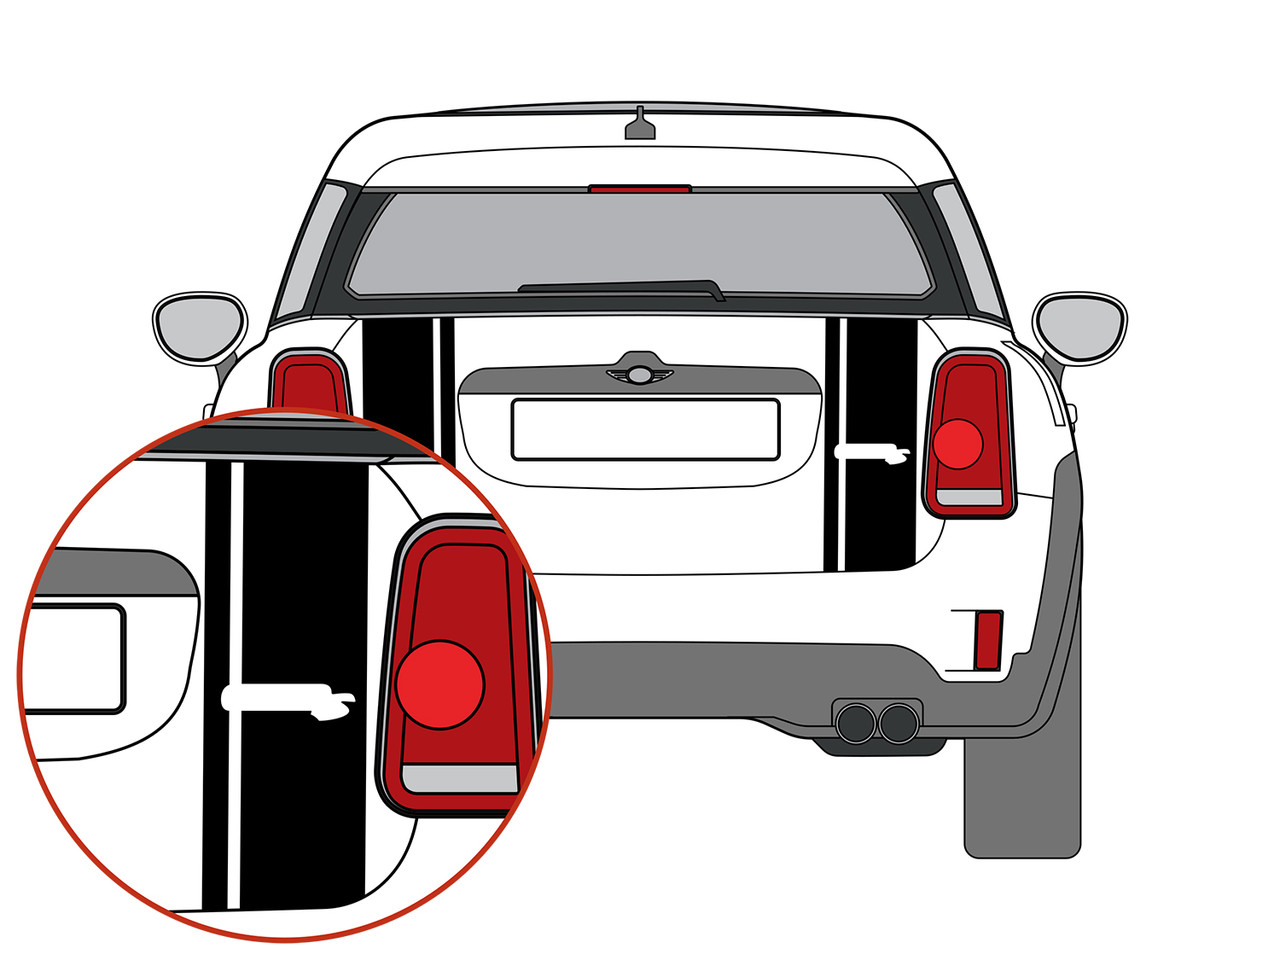 https://cdn11.bigcommerce.com/s-351ed/images/stencil/{:size}/products/19854/85673/decal_sets_for_mini_countryman_f60_boot_split_stripes_gloss_white_AR153Q0_19854__68944.1679007882.jpg?c=2